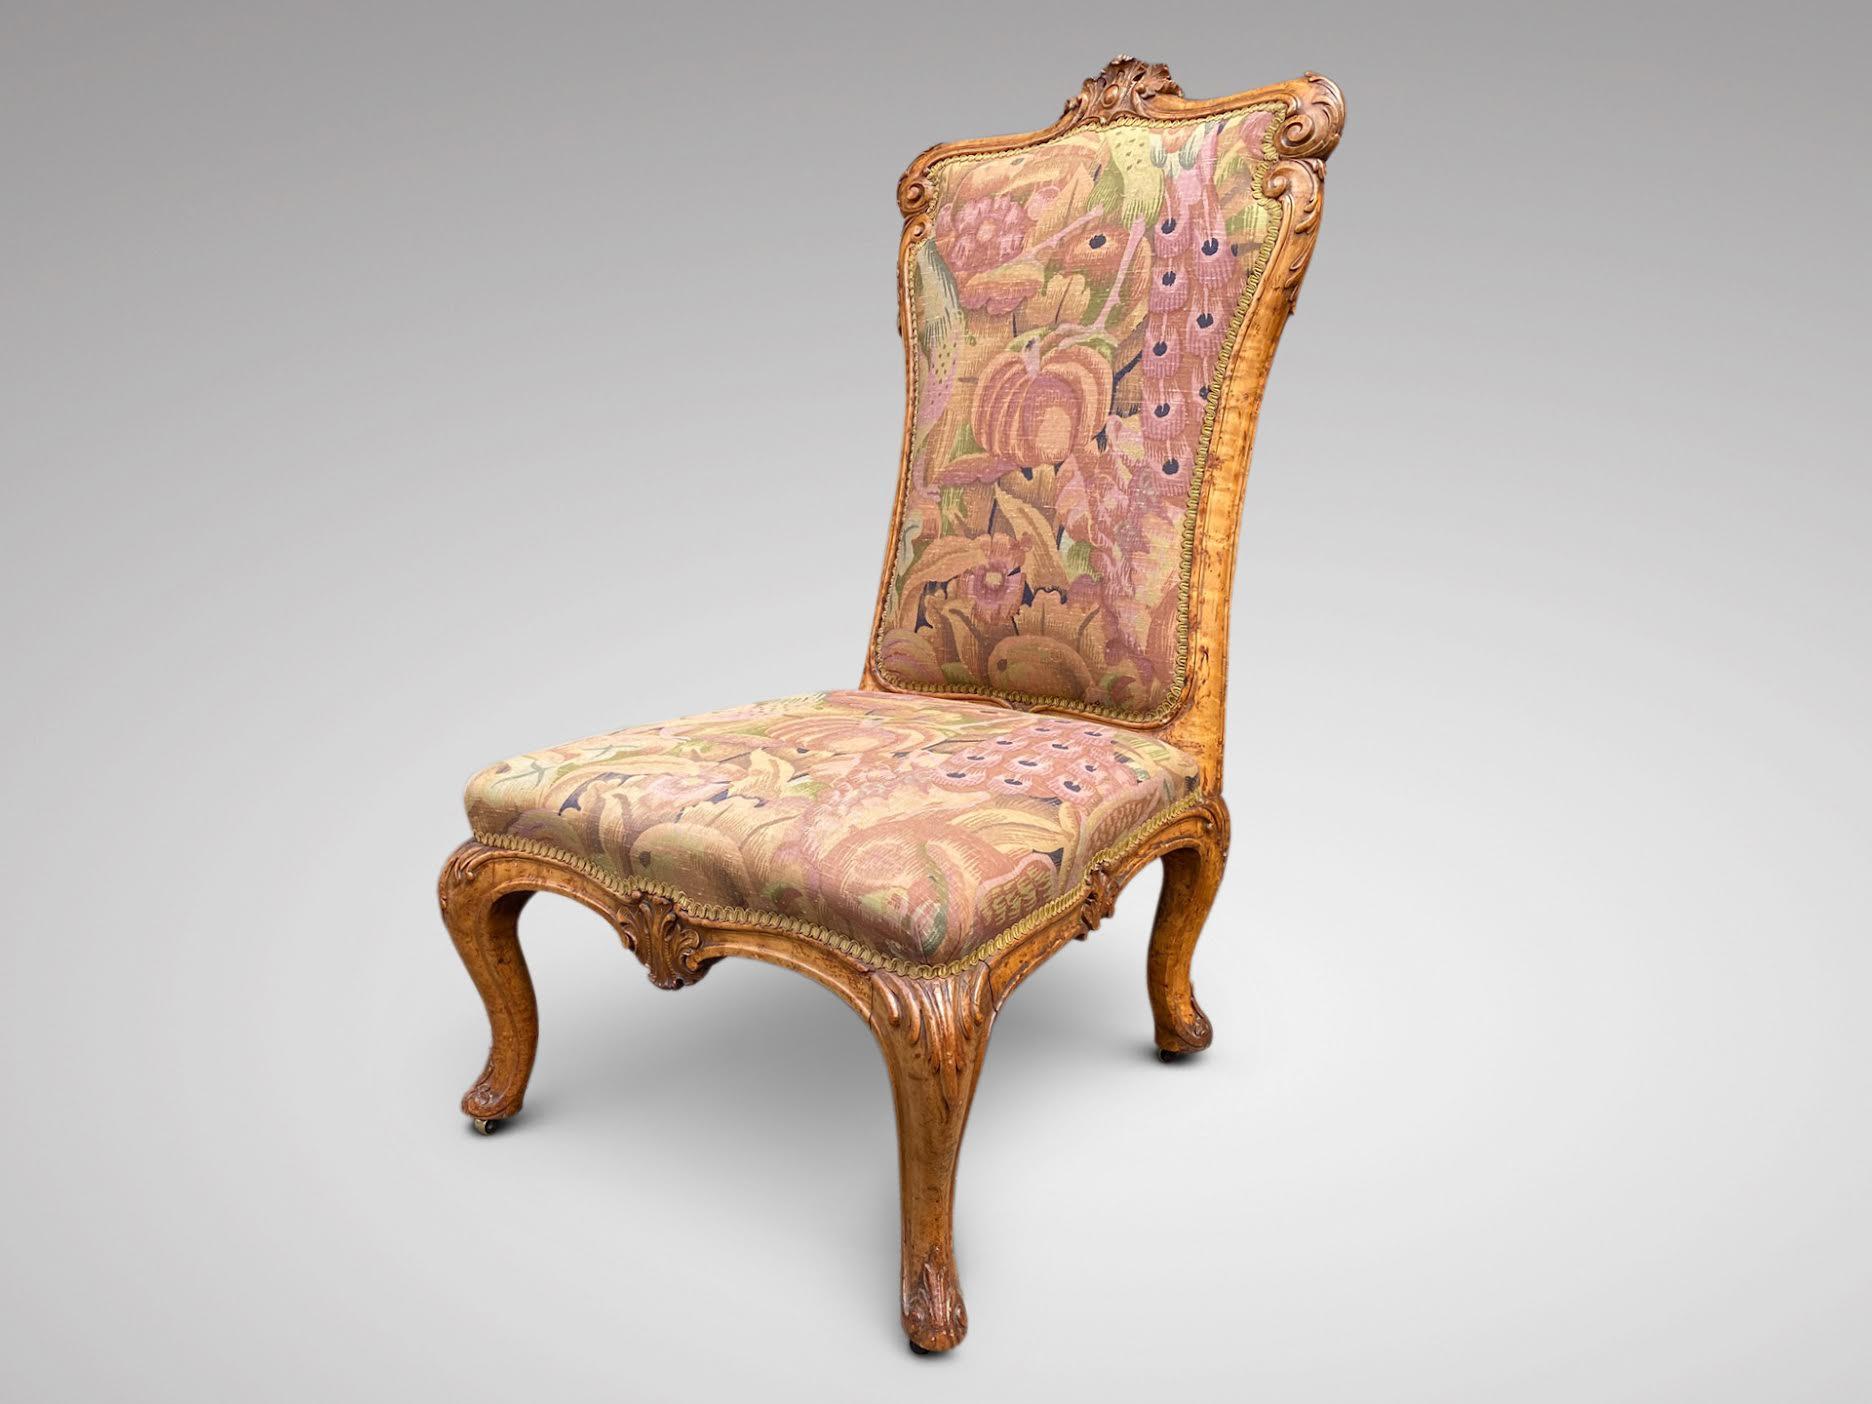 A mid 19th century, early Victorian period burr maple nursing chair. The burr maple foliate carved frame, with leaves head carved cresting rail, with upholstered back and set in a quality material. All standing up on beautifully foliate carved